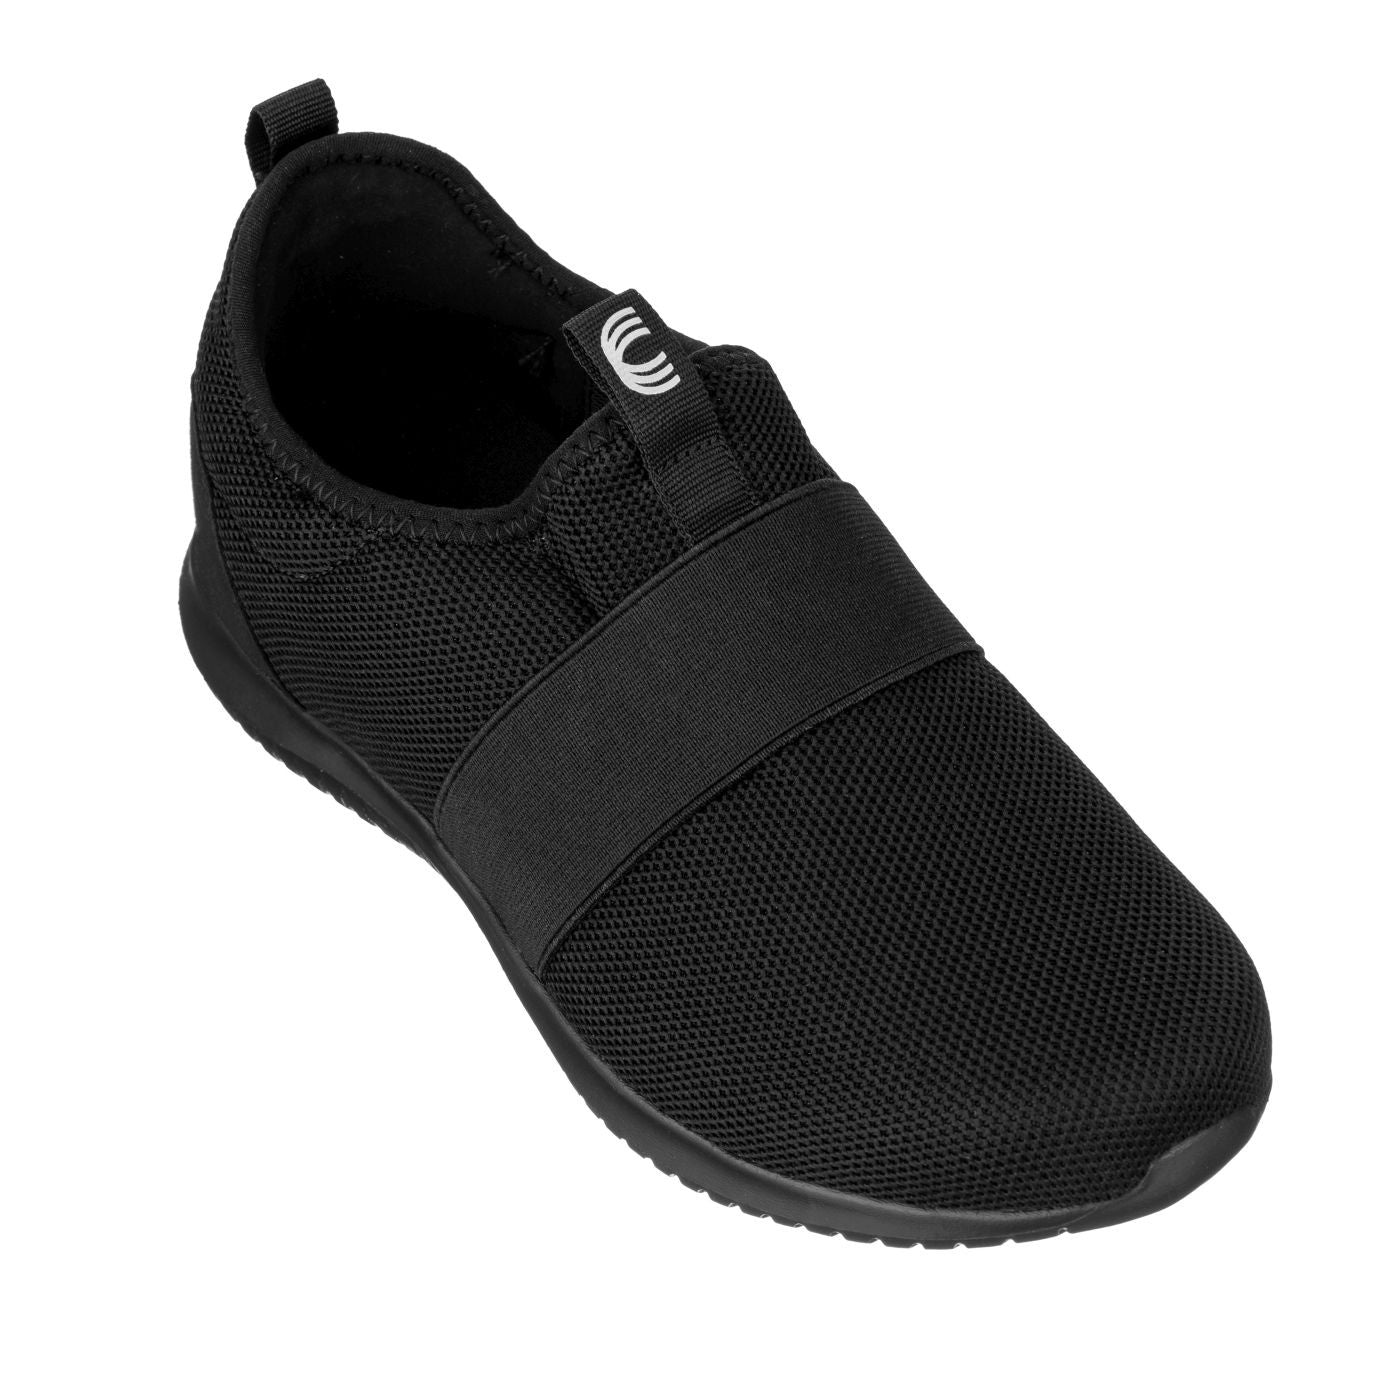 Elevator shoes height increase CALTO - Q120 - 2.1 Inches Taller (Black) - Ultra Feather Lightweight